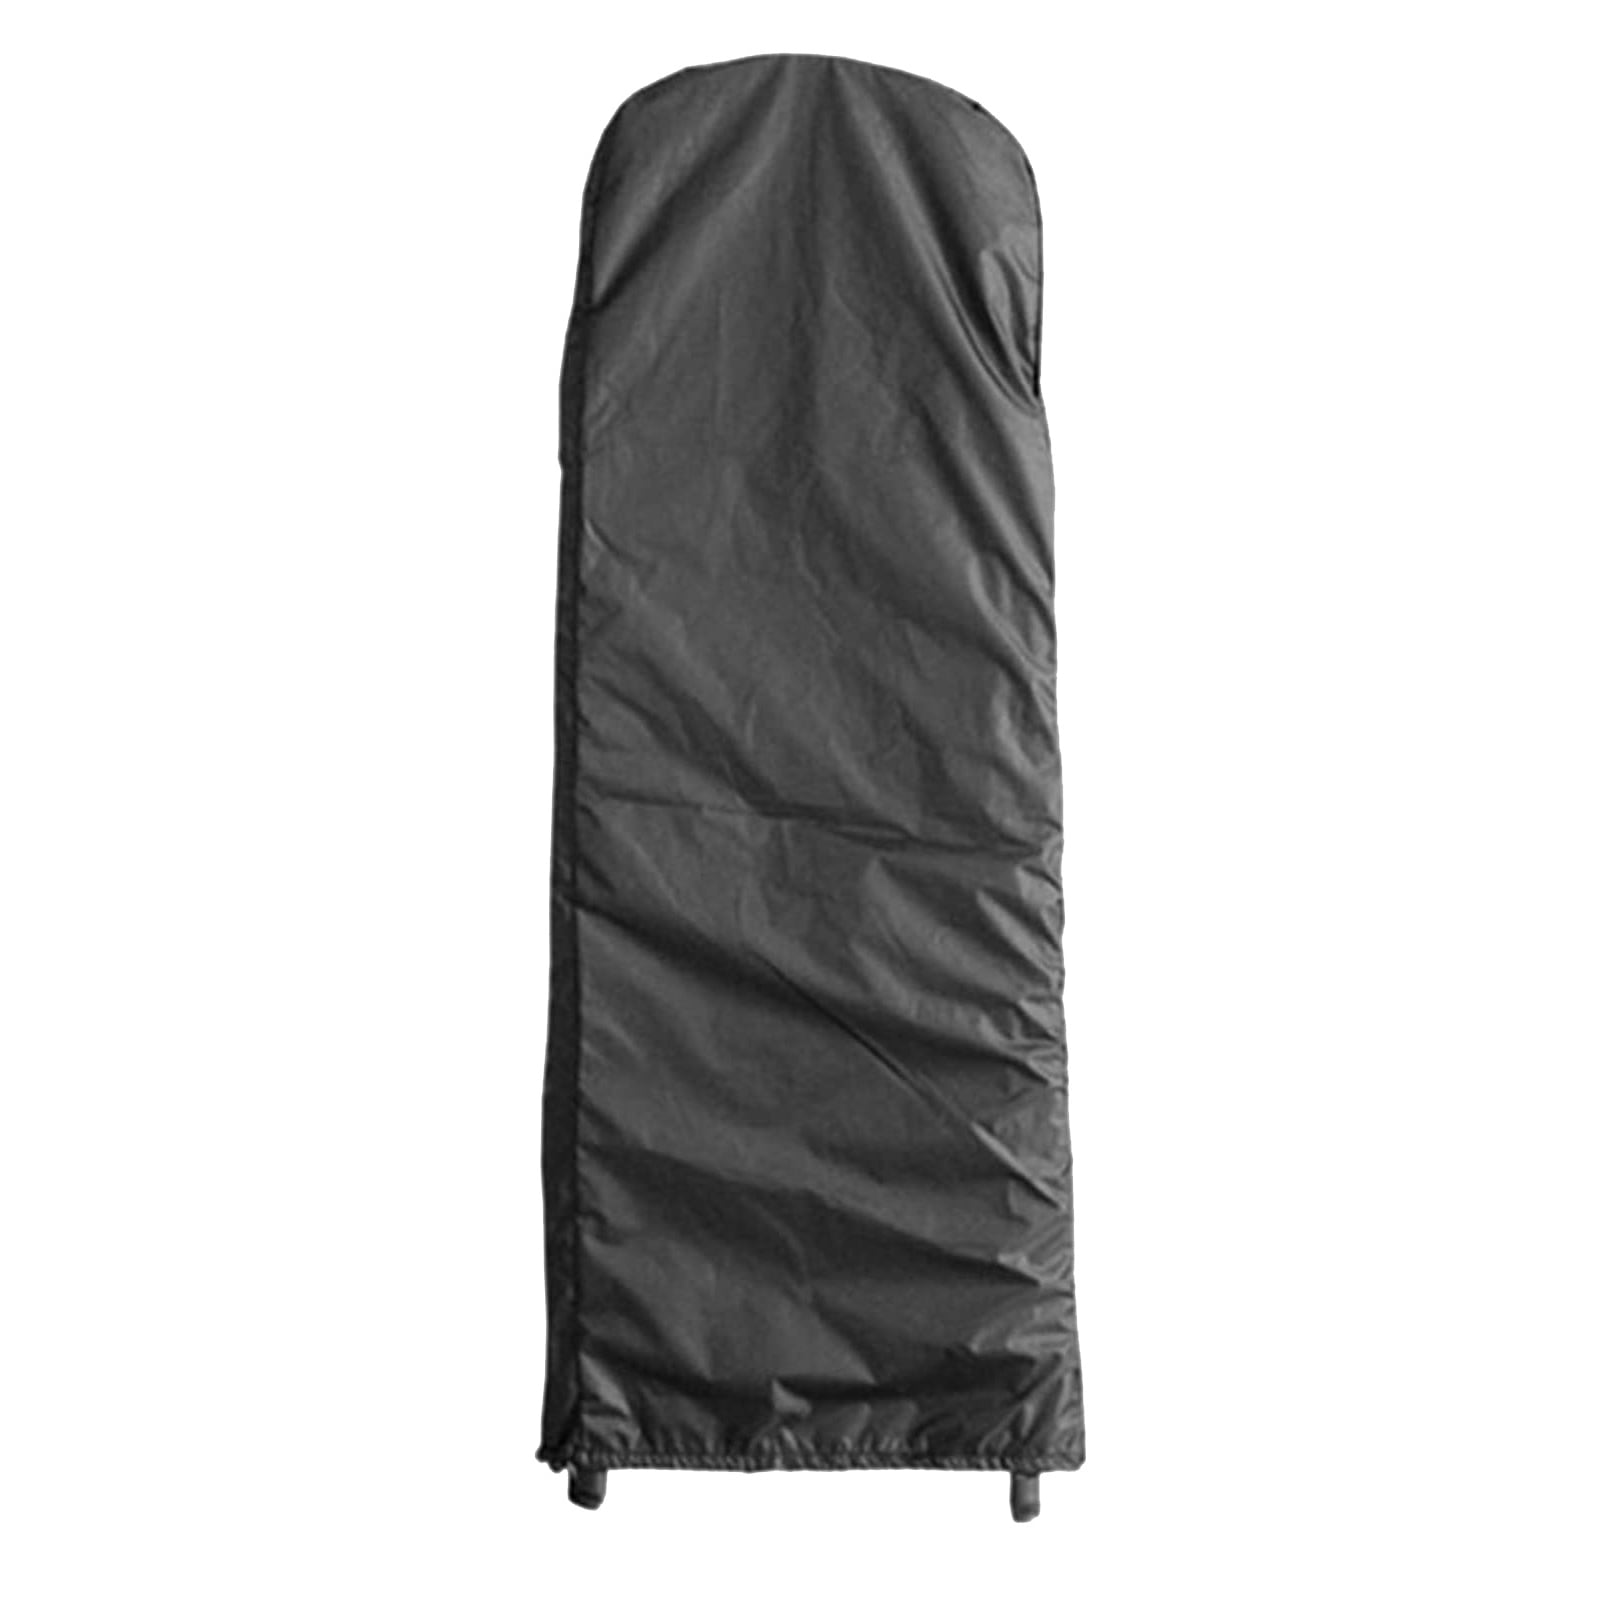 Ladder Protective Case With Drawstring Waterproof Dustproof Breathable For Step Ladders Waterproof Cover For Step Ladder Protective Cover For Ladd Gidenfly Folding Ladder Cover